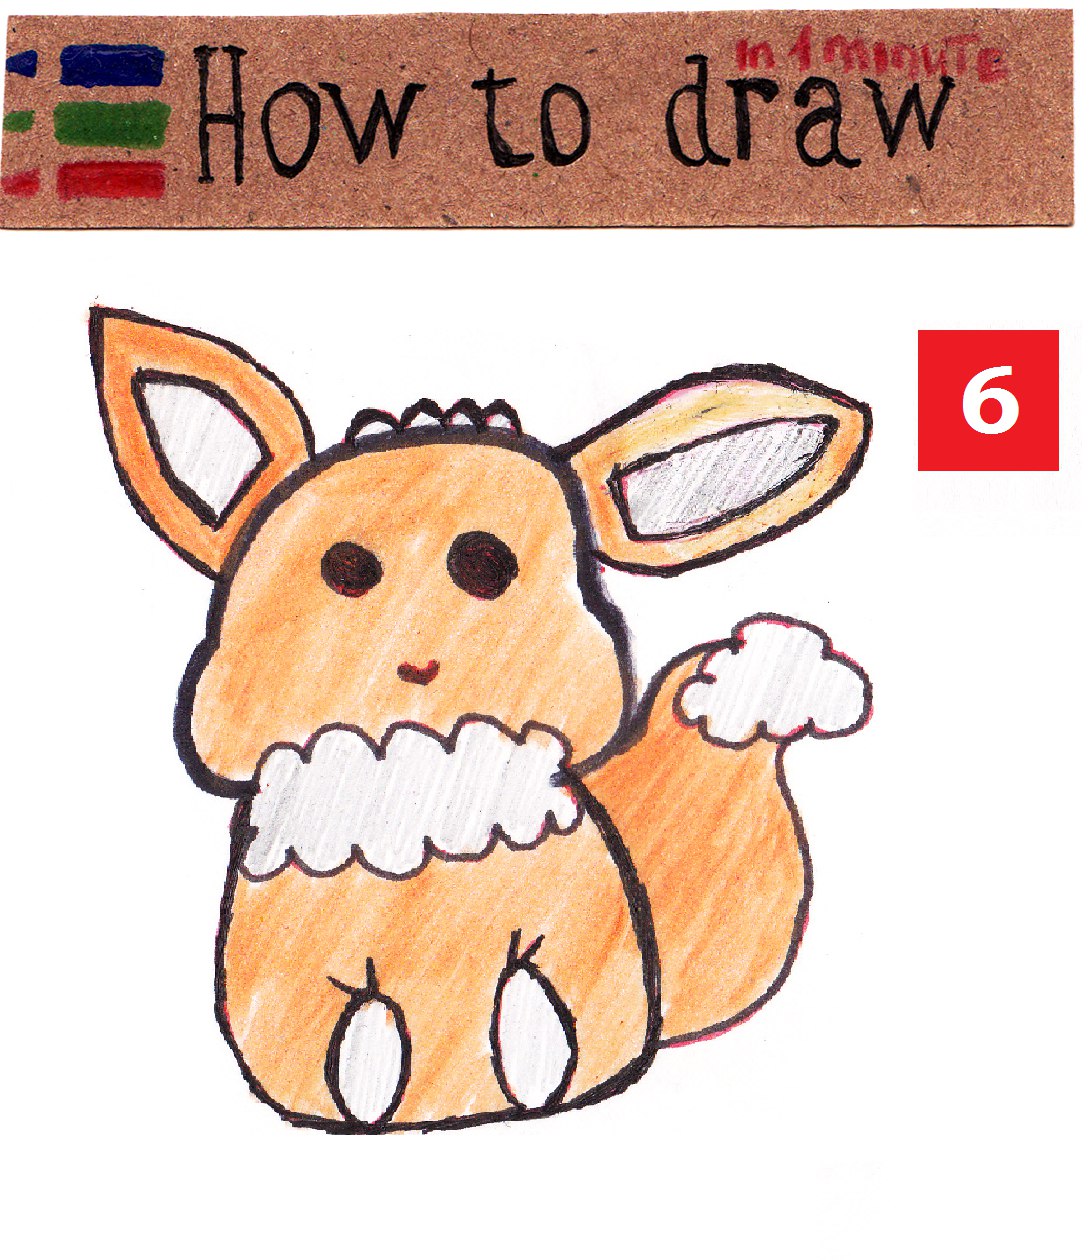 How to draw Pokemon Eevee step by step